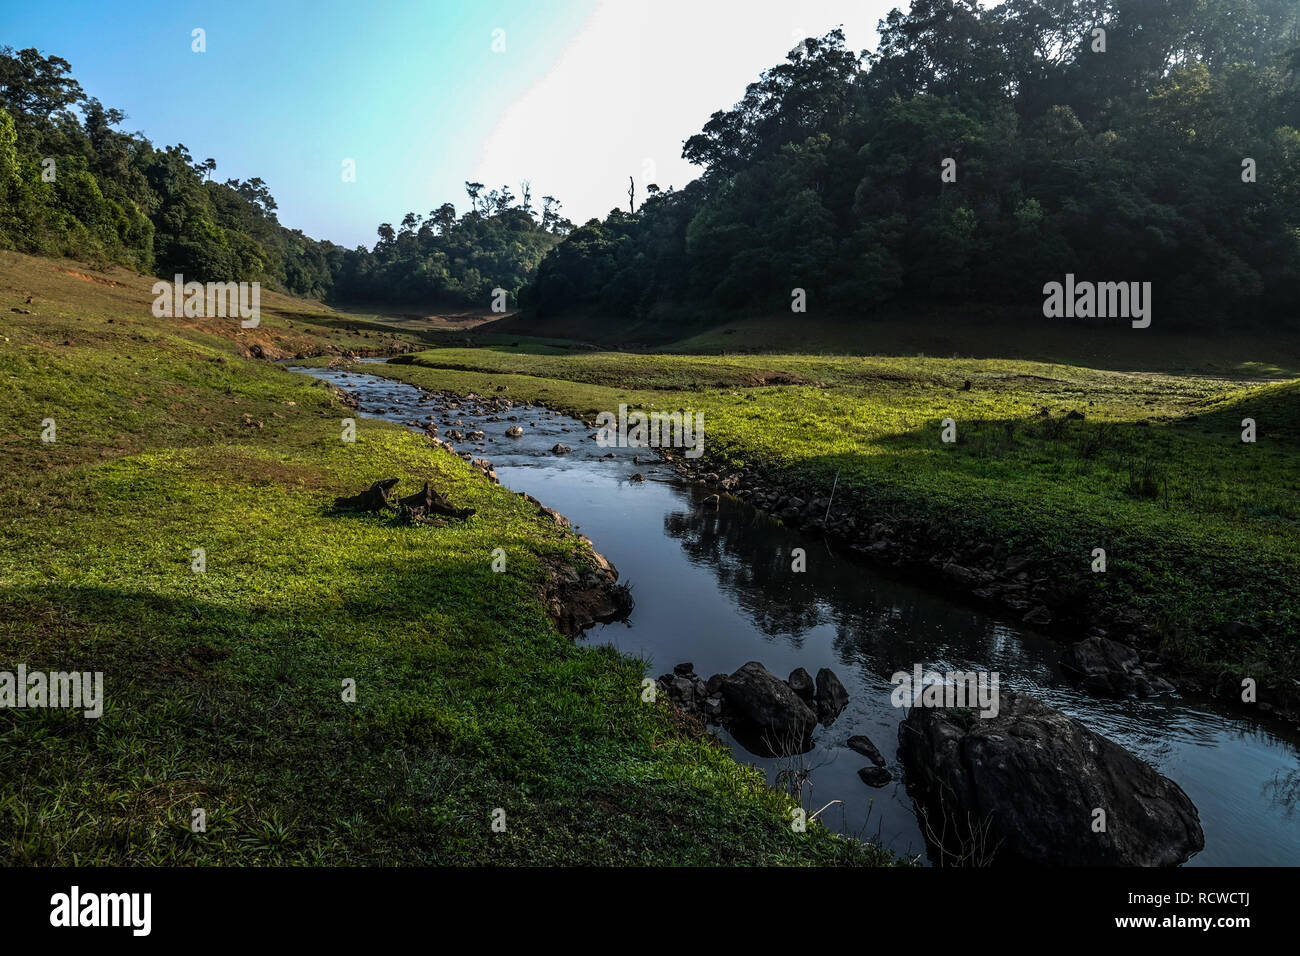 Morning landscape in Gavi ecotourism forest with wide variety of birds, monkeys and a herd of elephants in its natural habitat Stock Photo